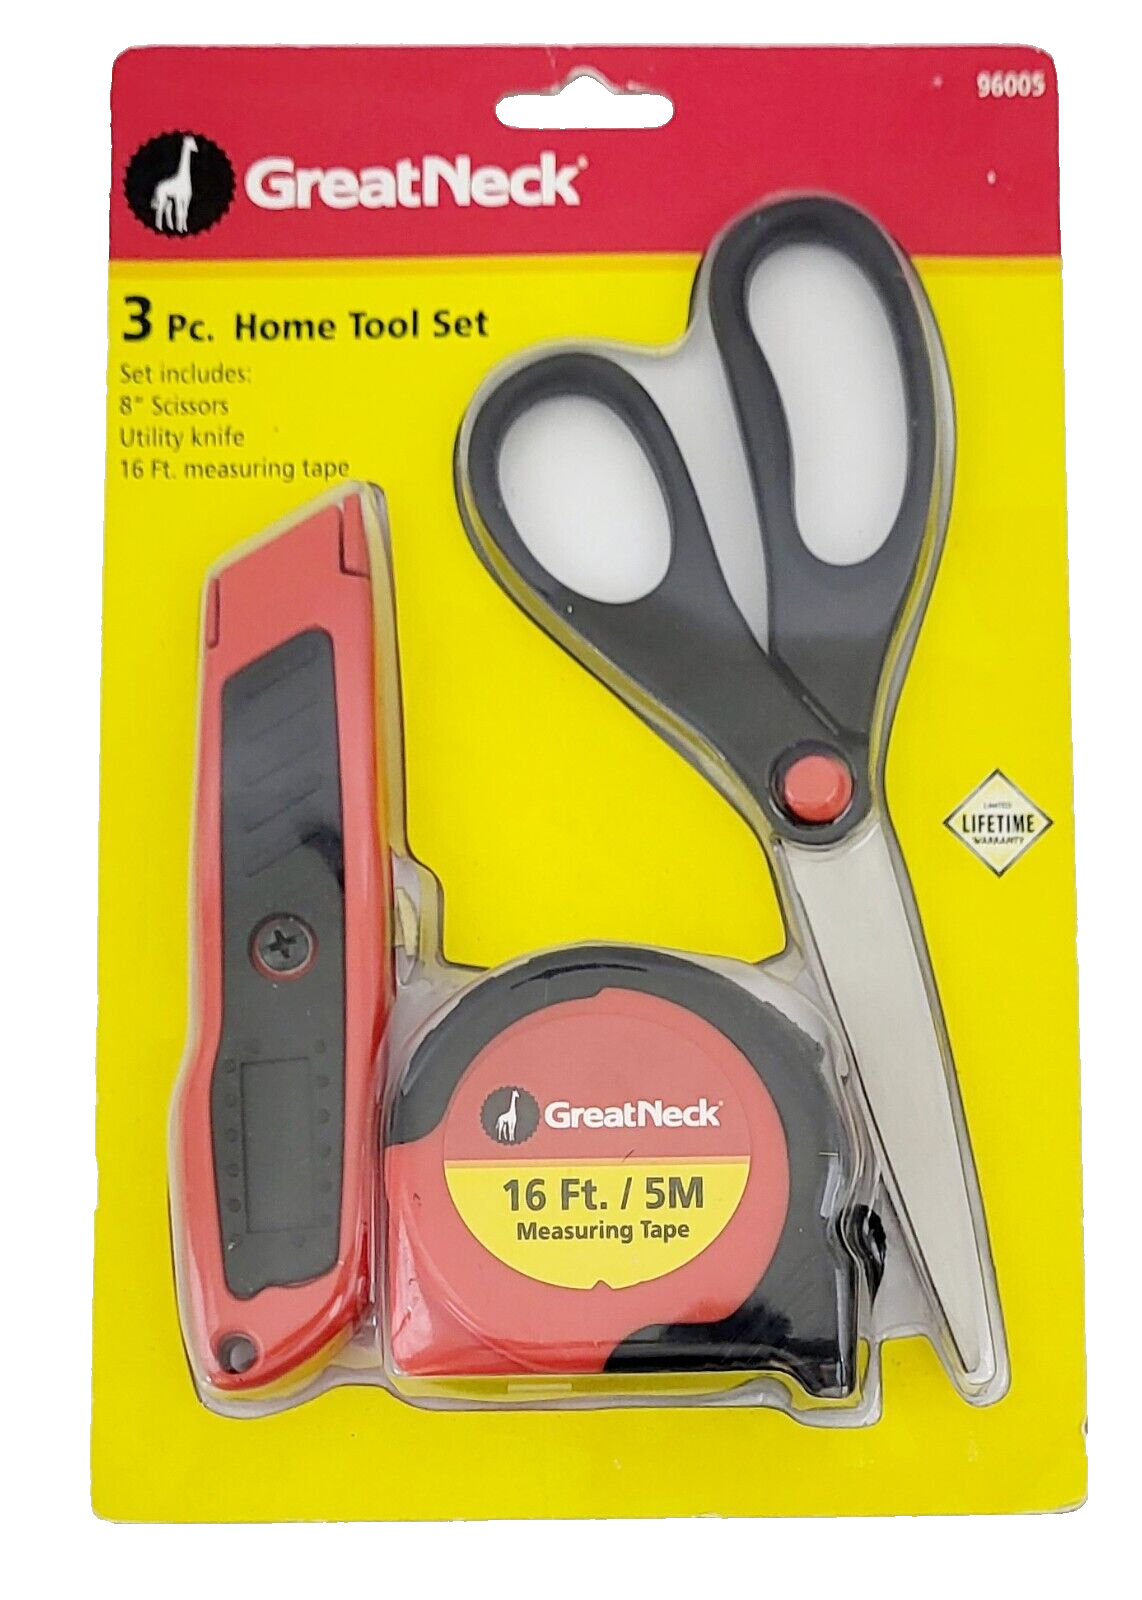 Great Neck Home Tools 3 Pc. Household Tool Set - $9.65